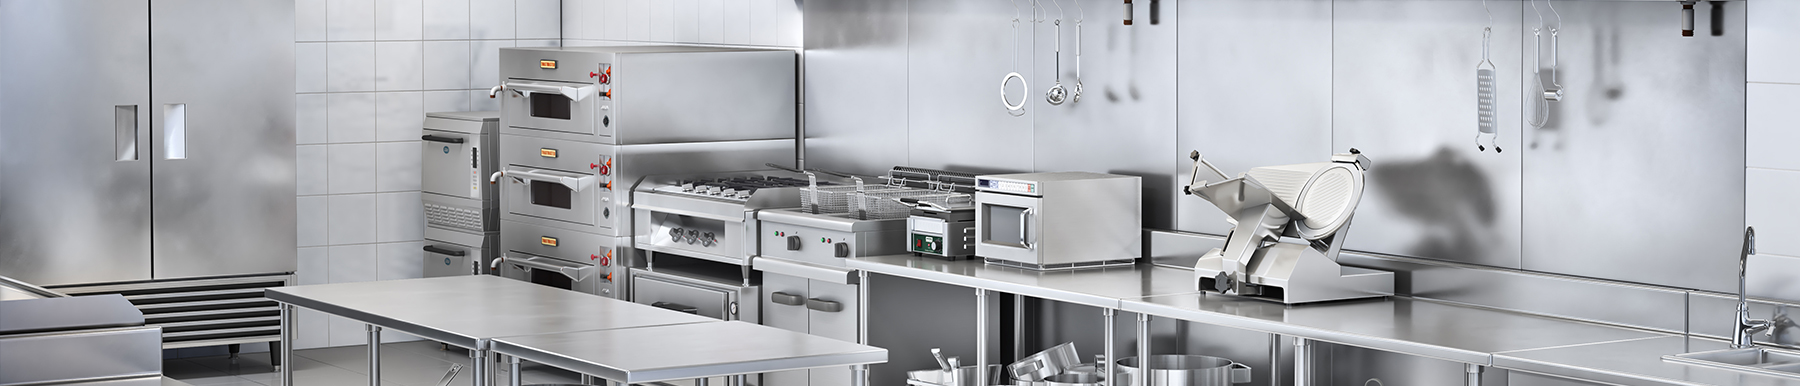 Catering Equipment Suppliers Near Colchester | H2 Catering Equipment Catering Equipment